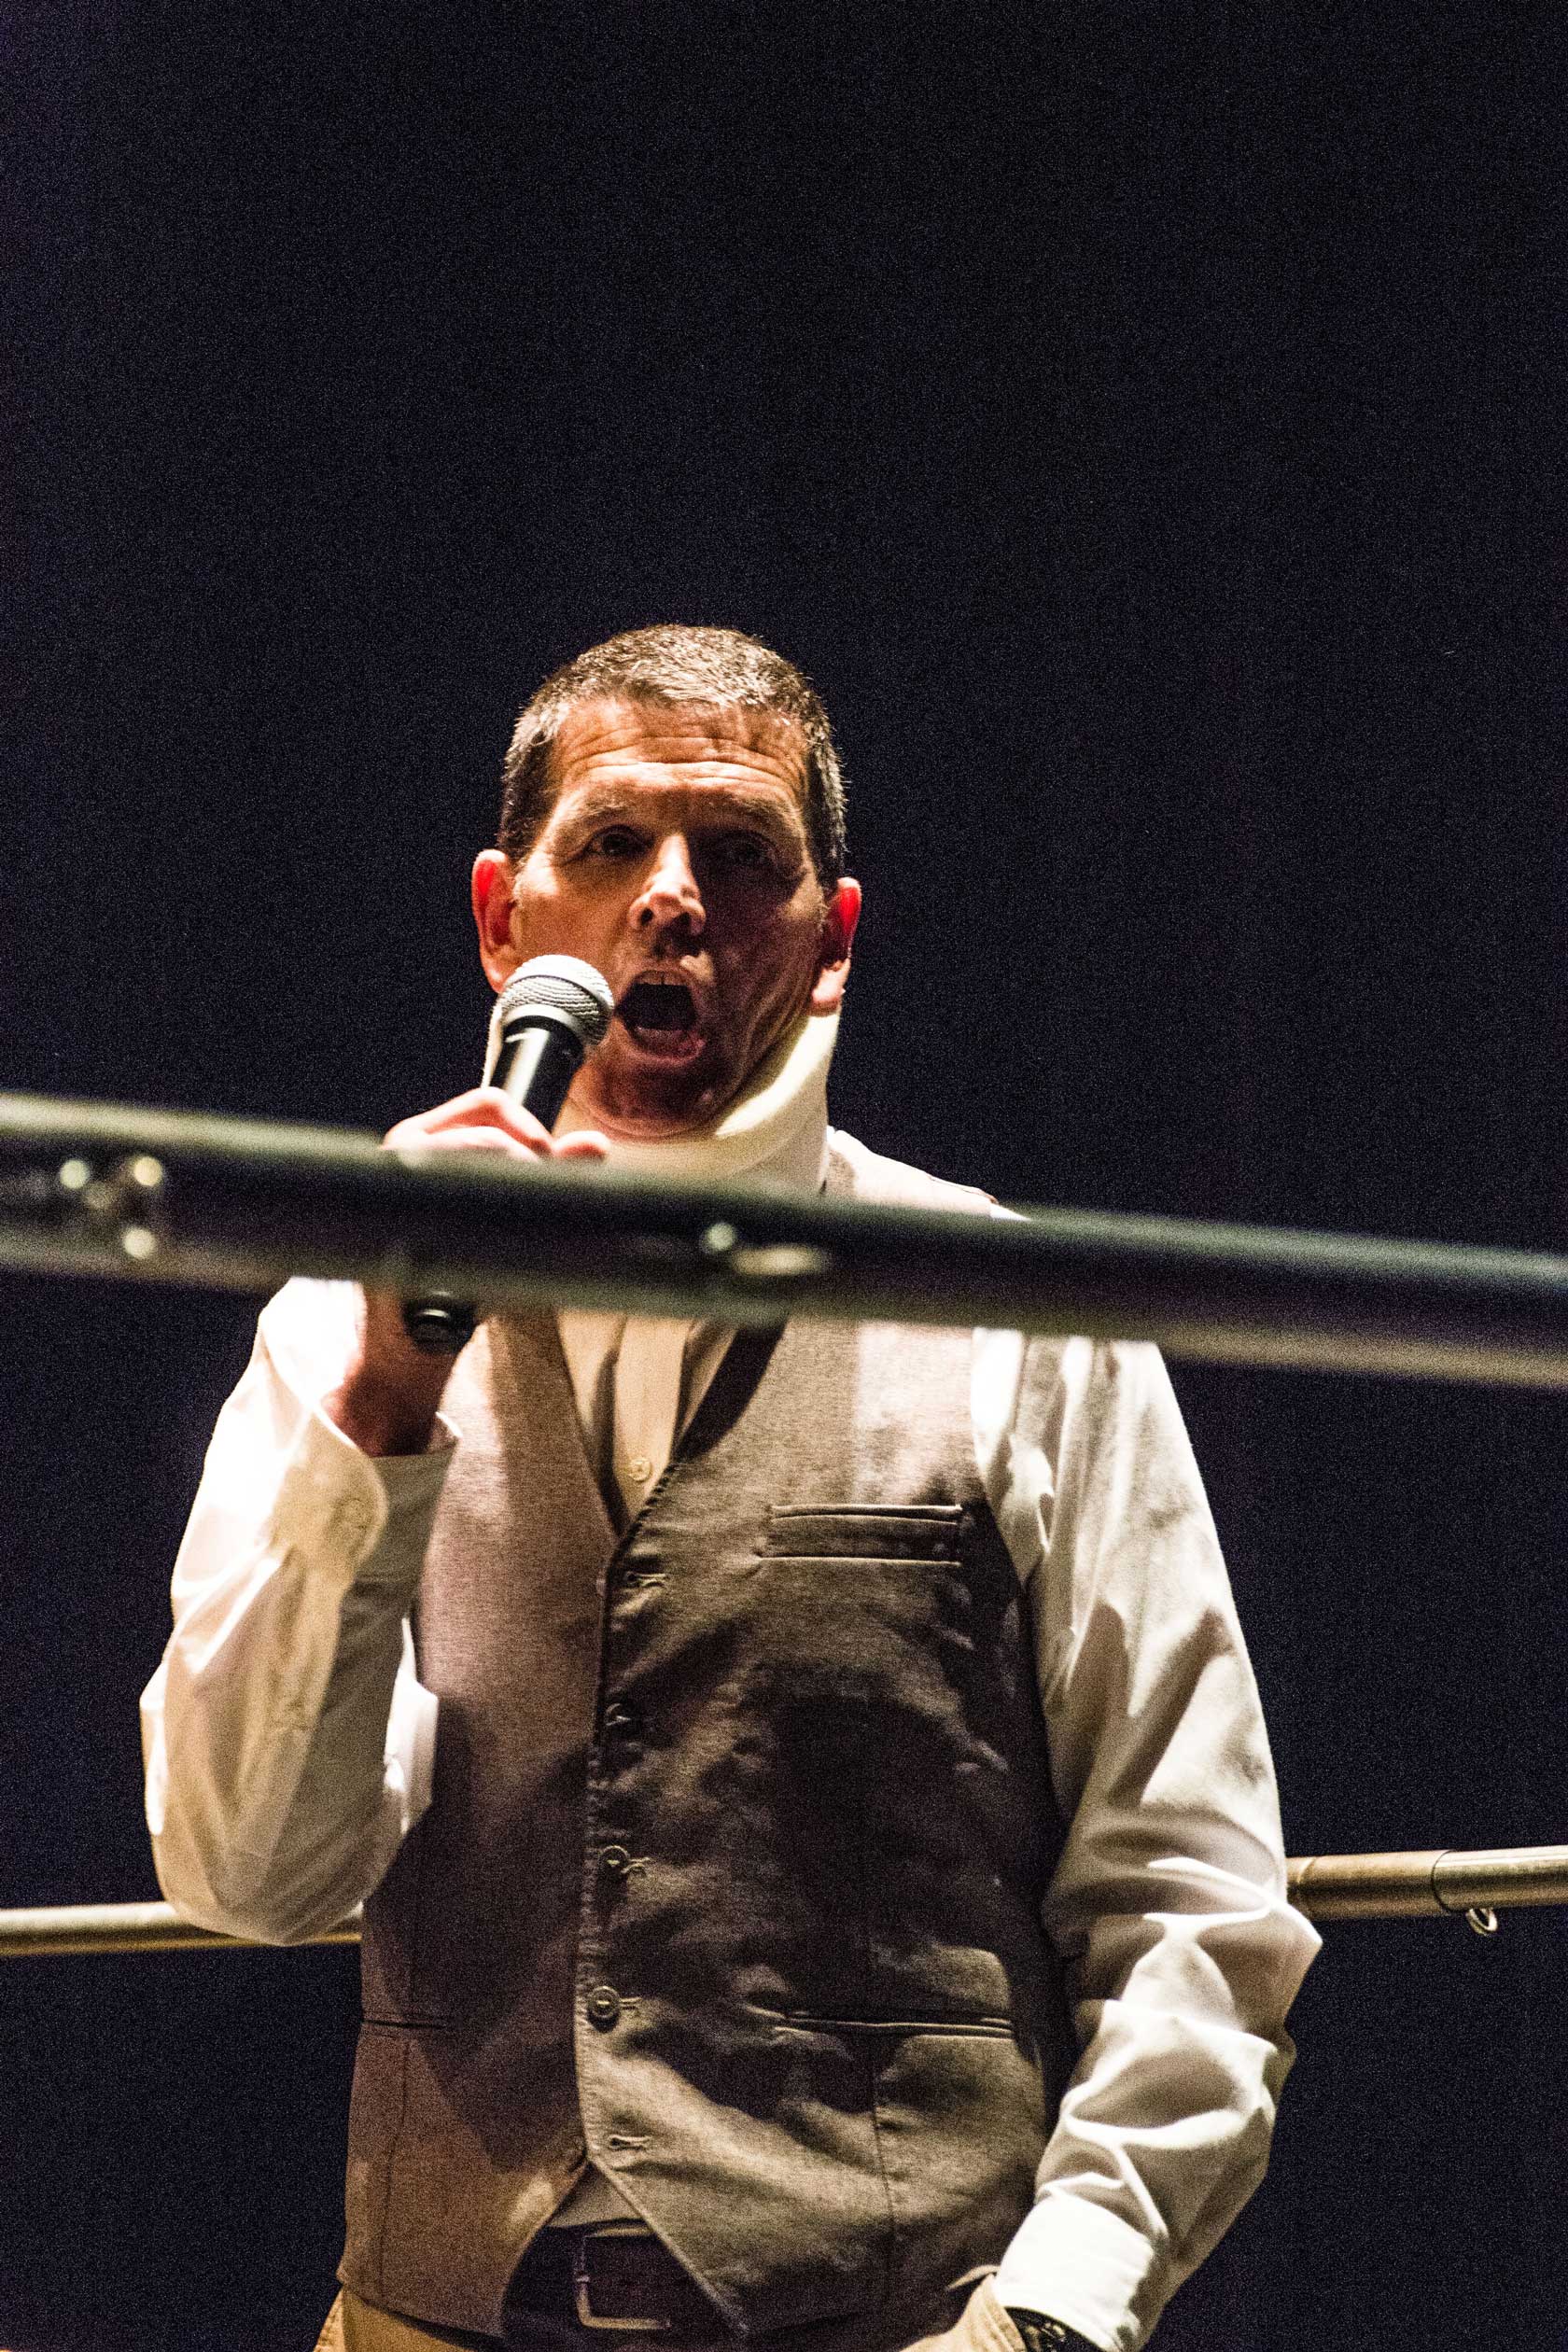 Paul Tyndall the Ring Announcer.